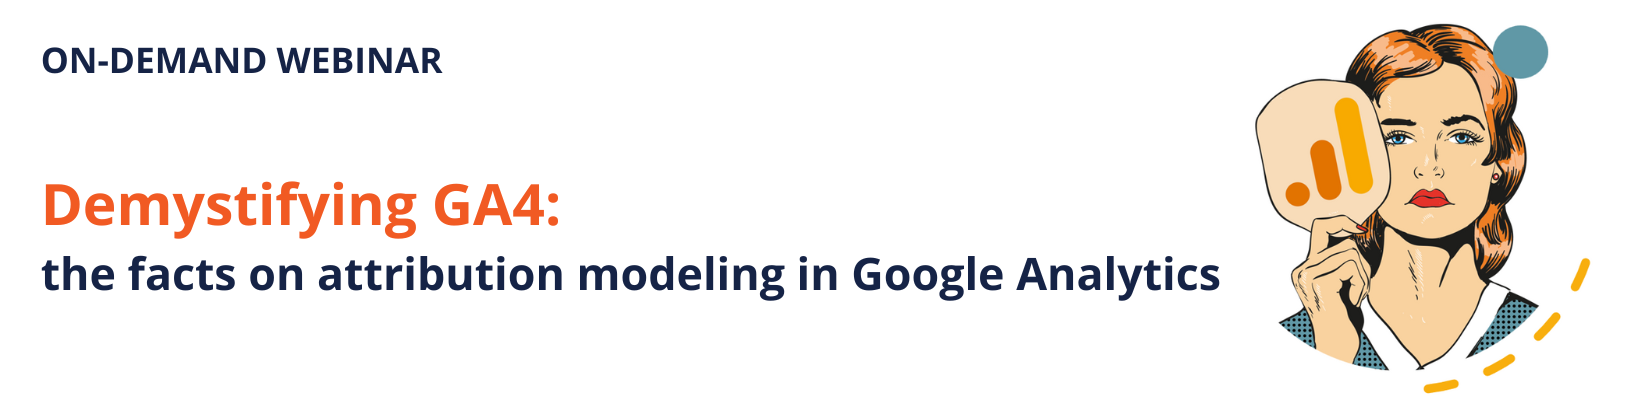 Demystifying GA4 the facts on attribution modeling in Google Analytics